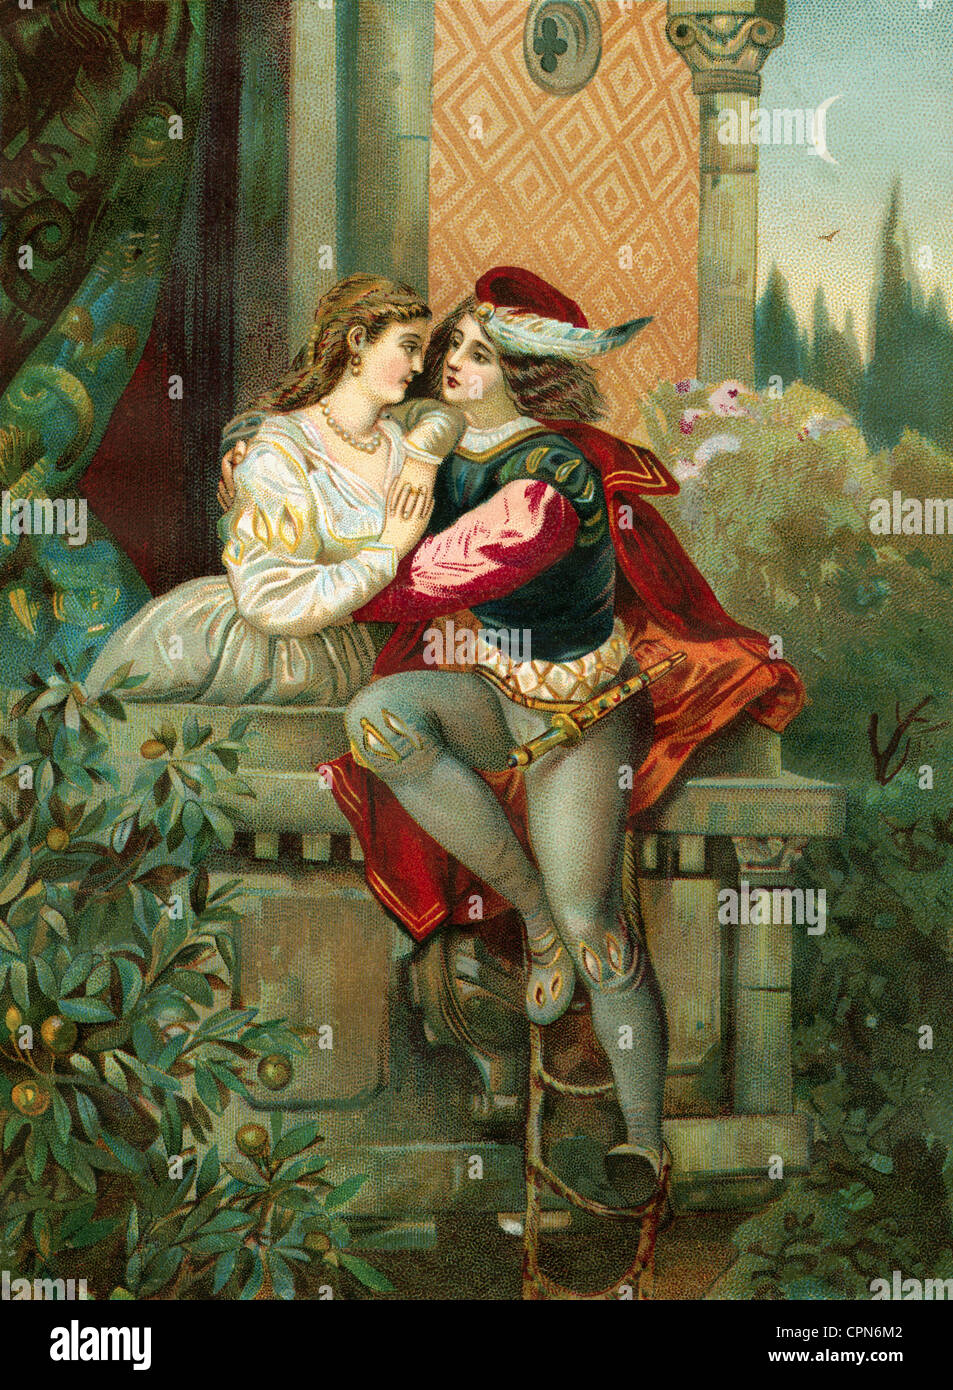 people, couples, lovers, Germany, 1879, Additional-Rights-Clearences-Not Available Stock Photo